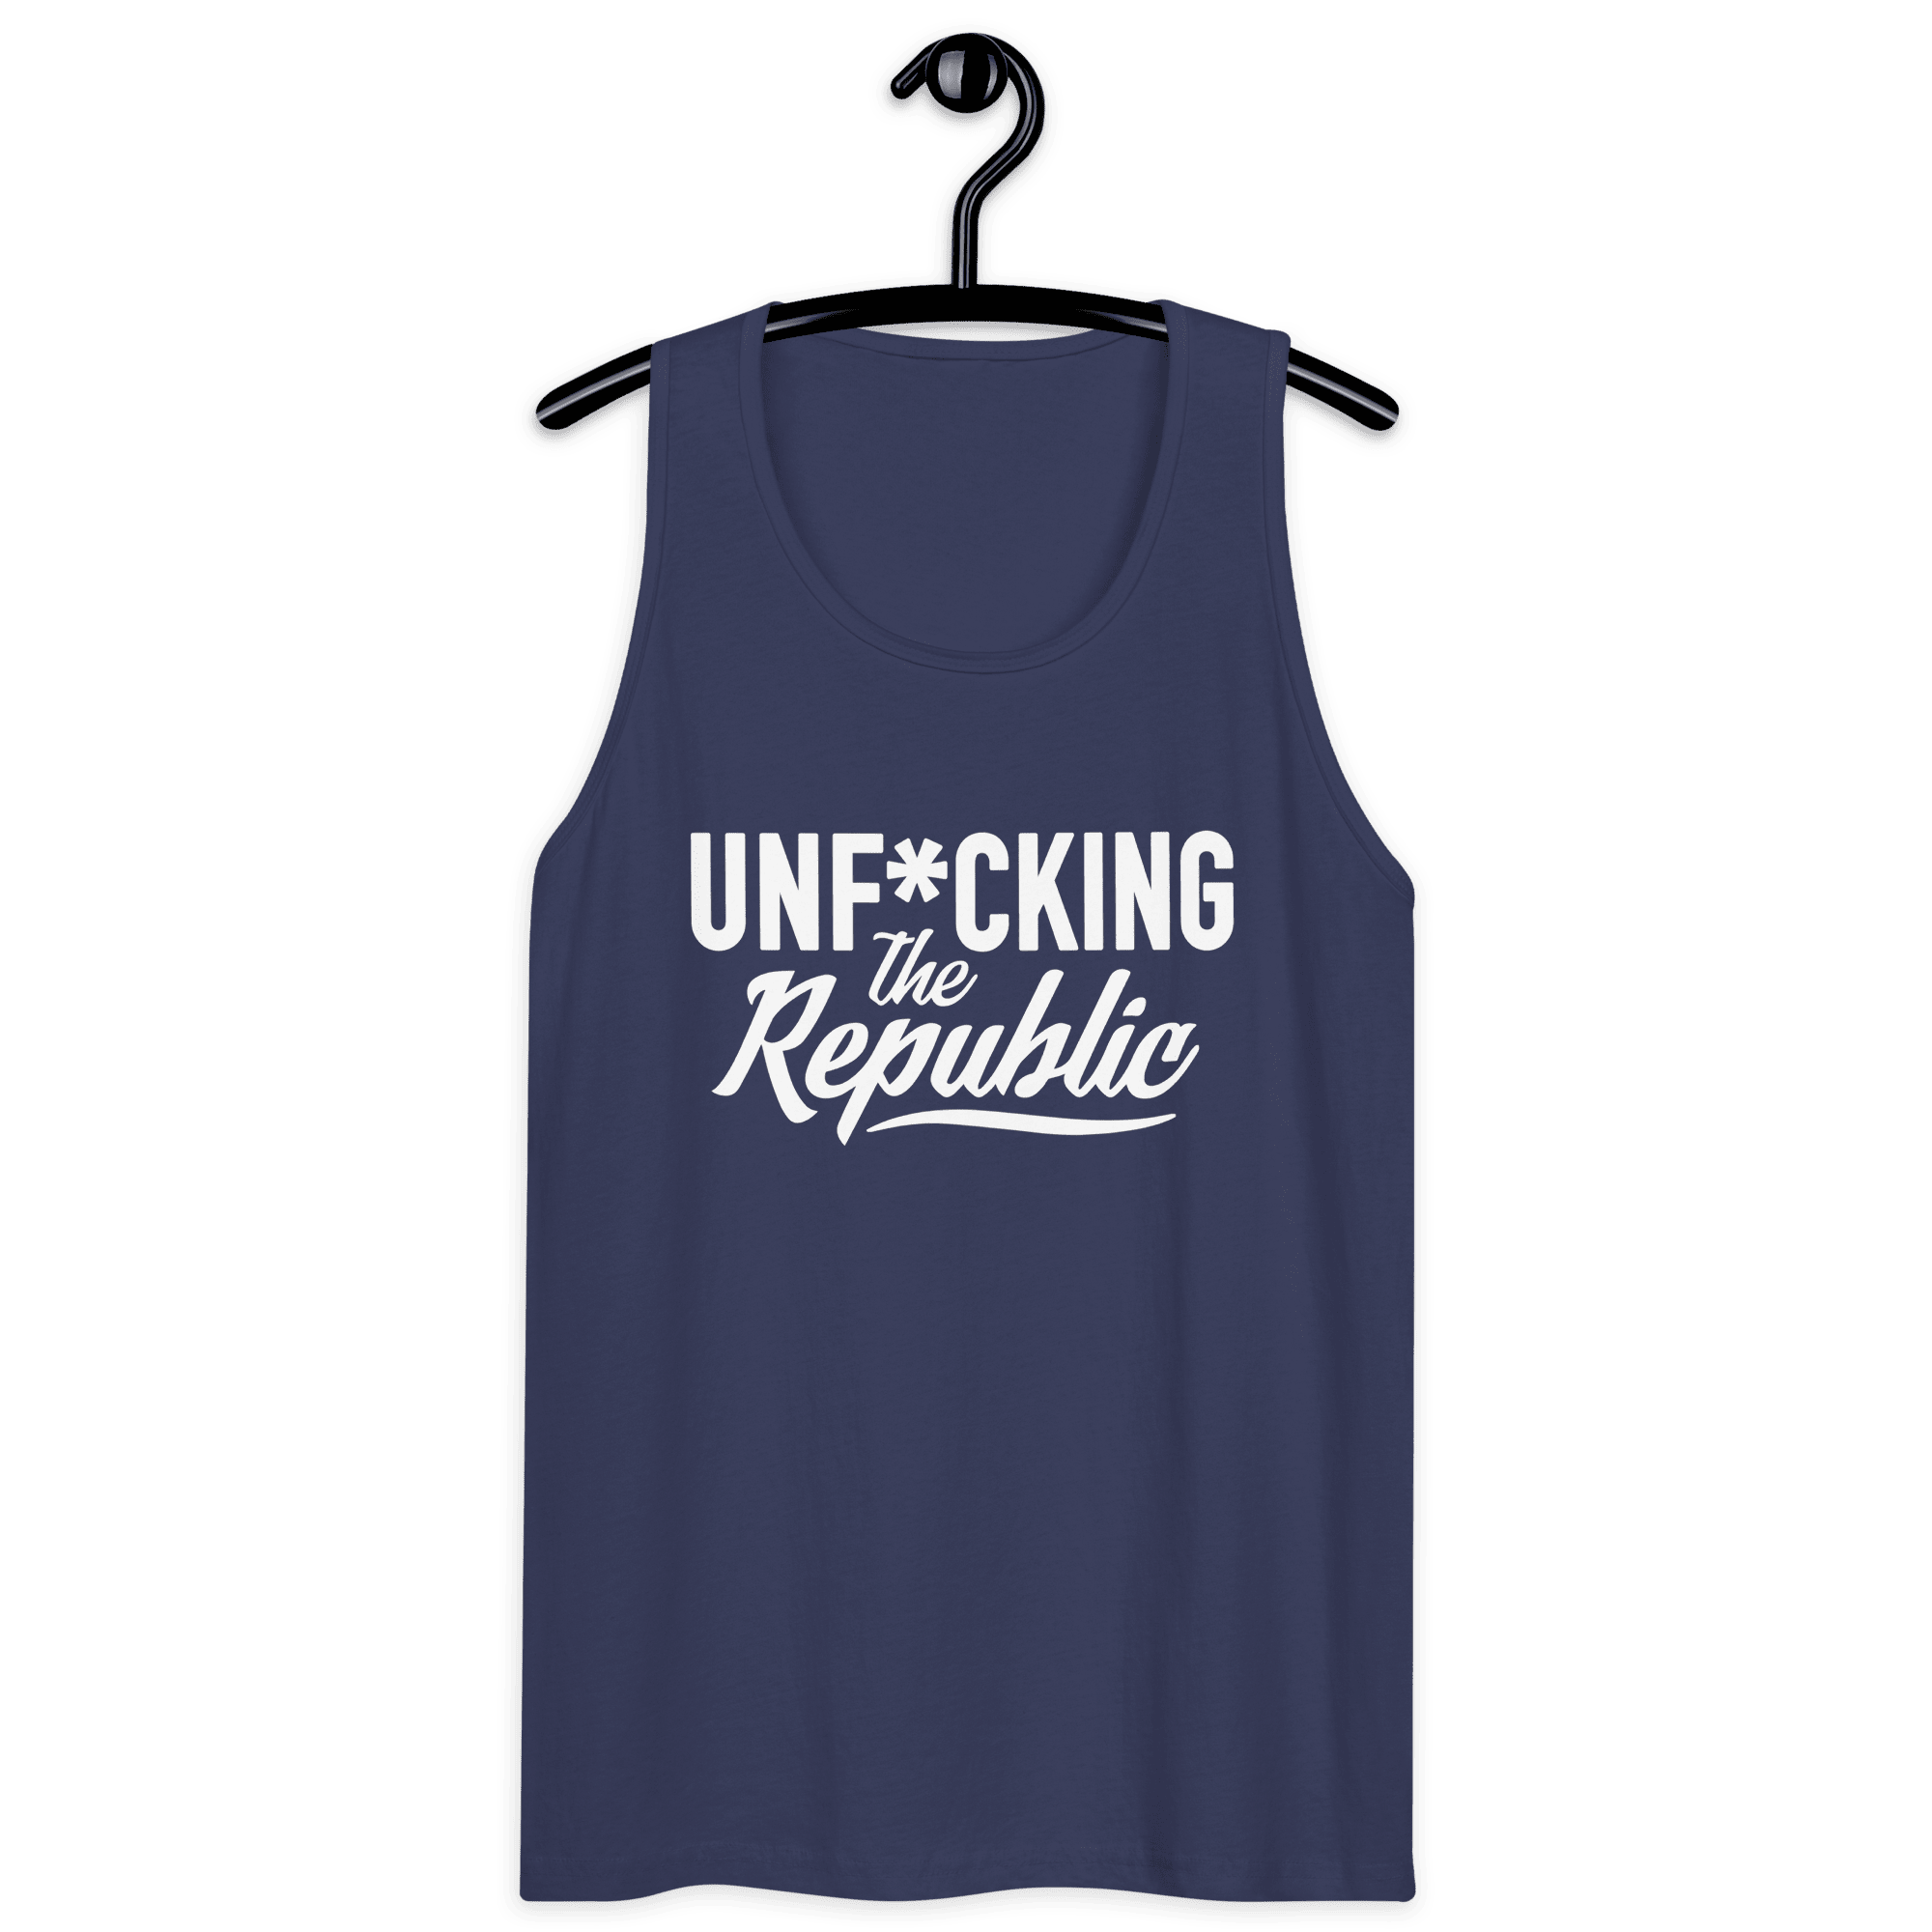 Classic Tank top in navy with White Unf*cking The Republic logo on the chest